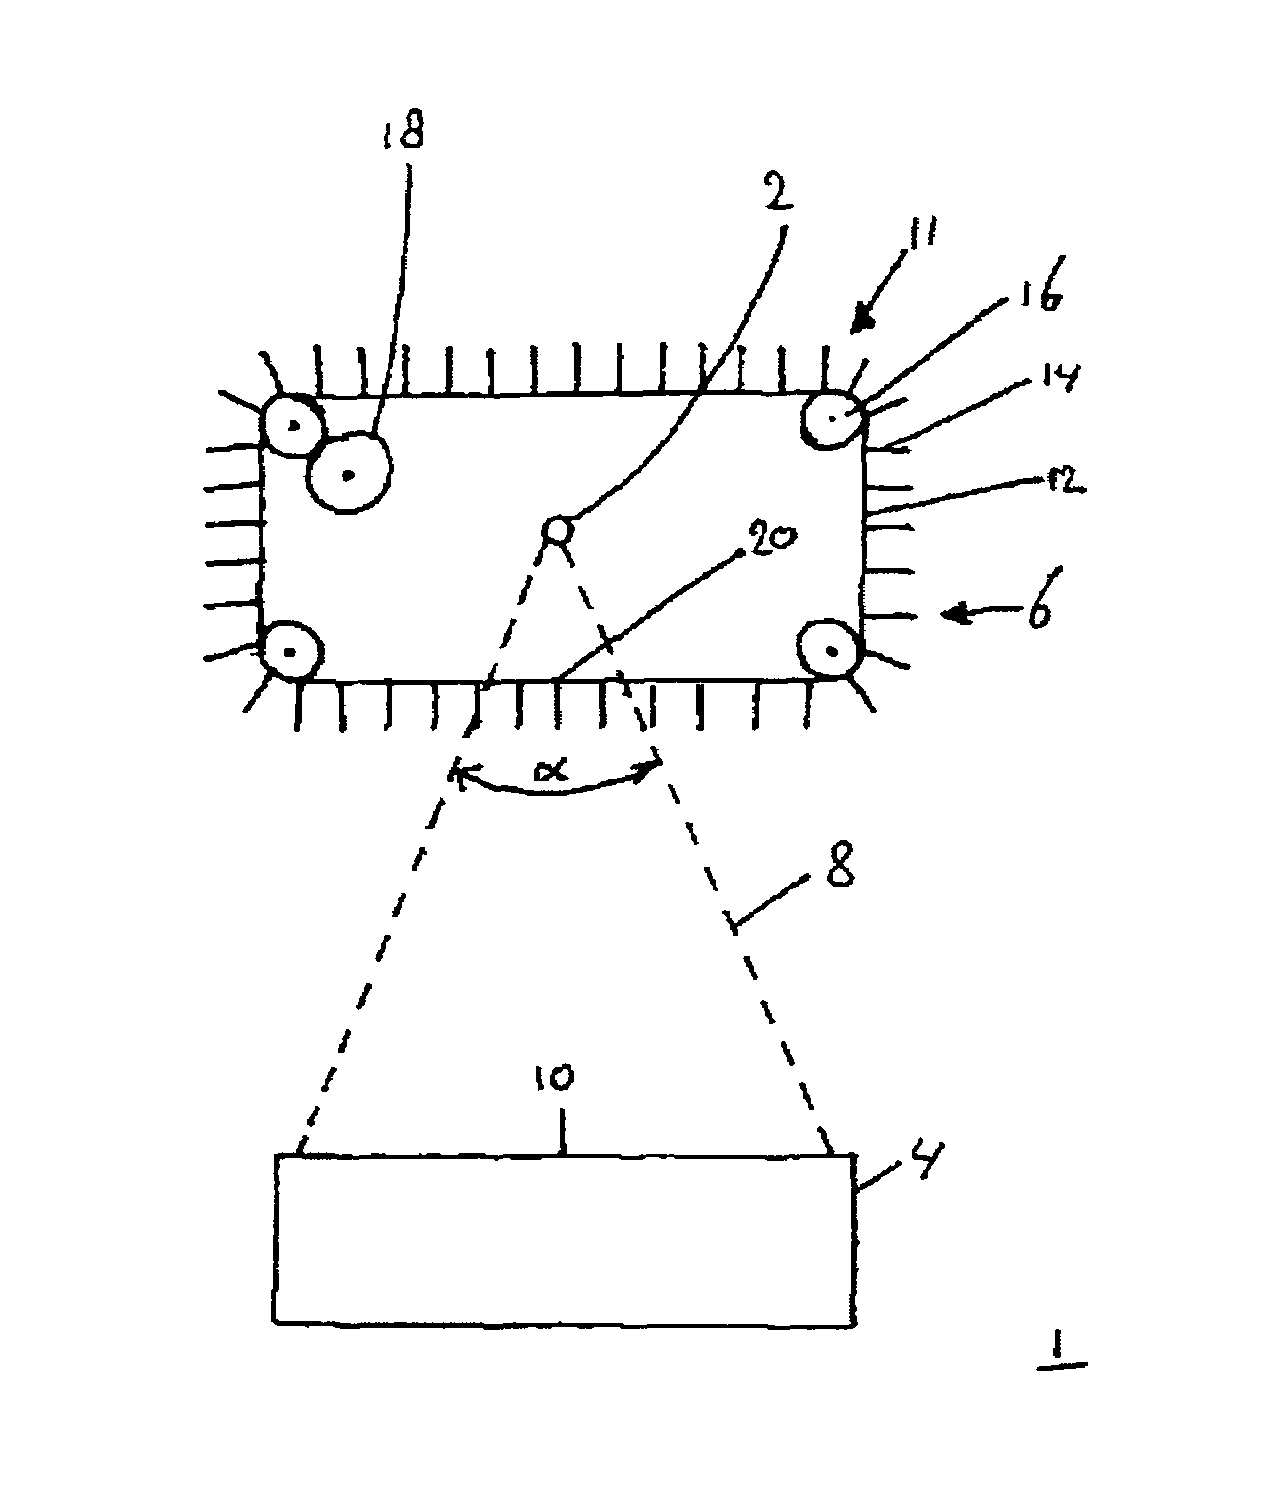 Apparatus including a radiation source, a filter system for filtering particles out of radiation emitted by the source, and a processing system for processing the radiation, a lithographic apparatus including such an apparatus, and a method of filtering particles out of radiation emitting and propagating from a radiation source